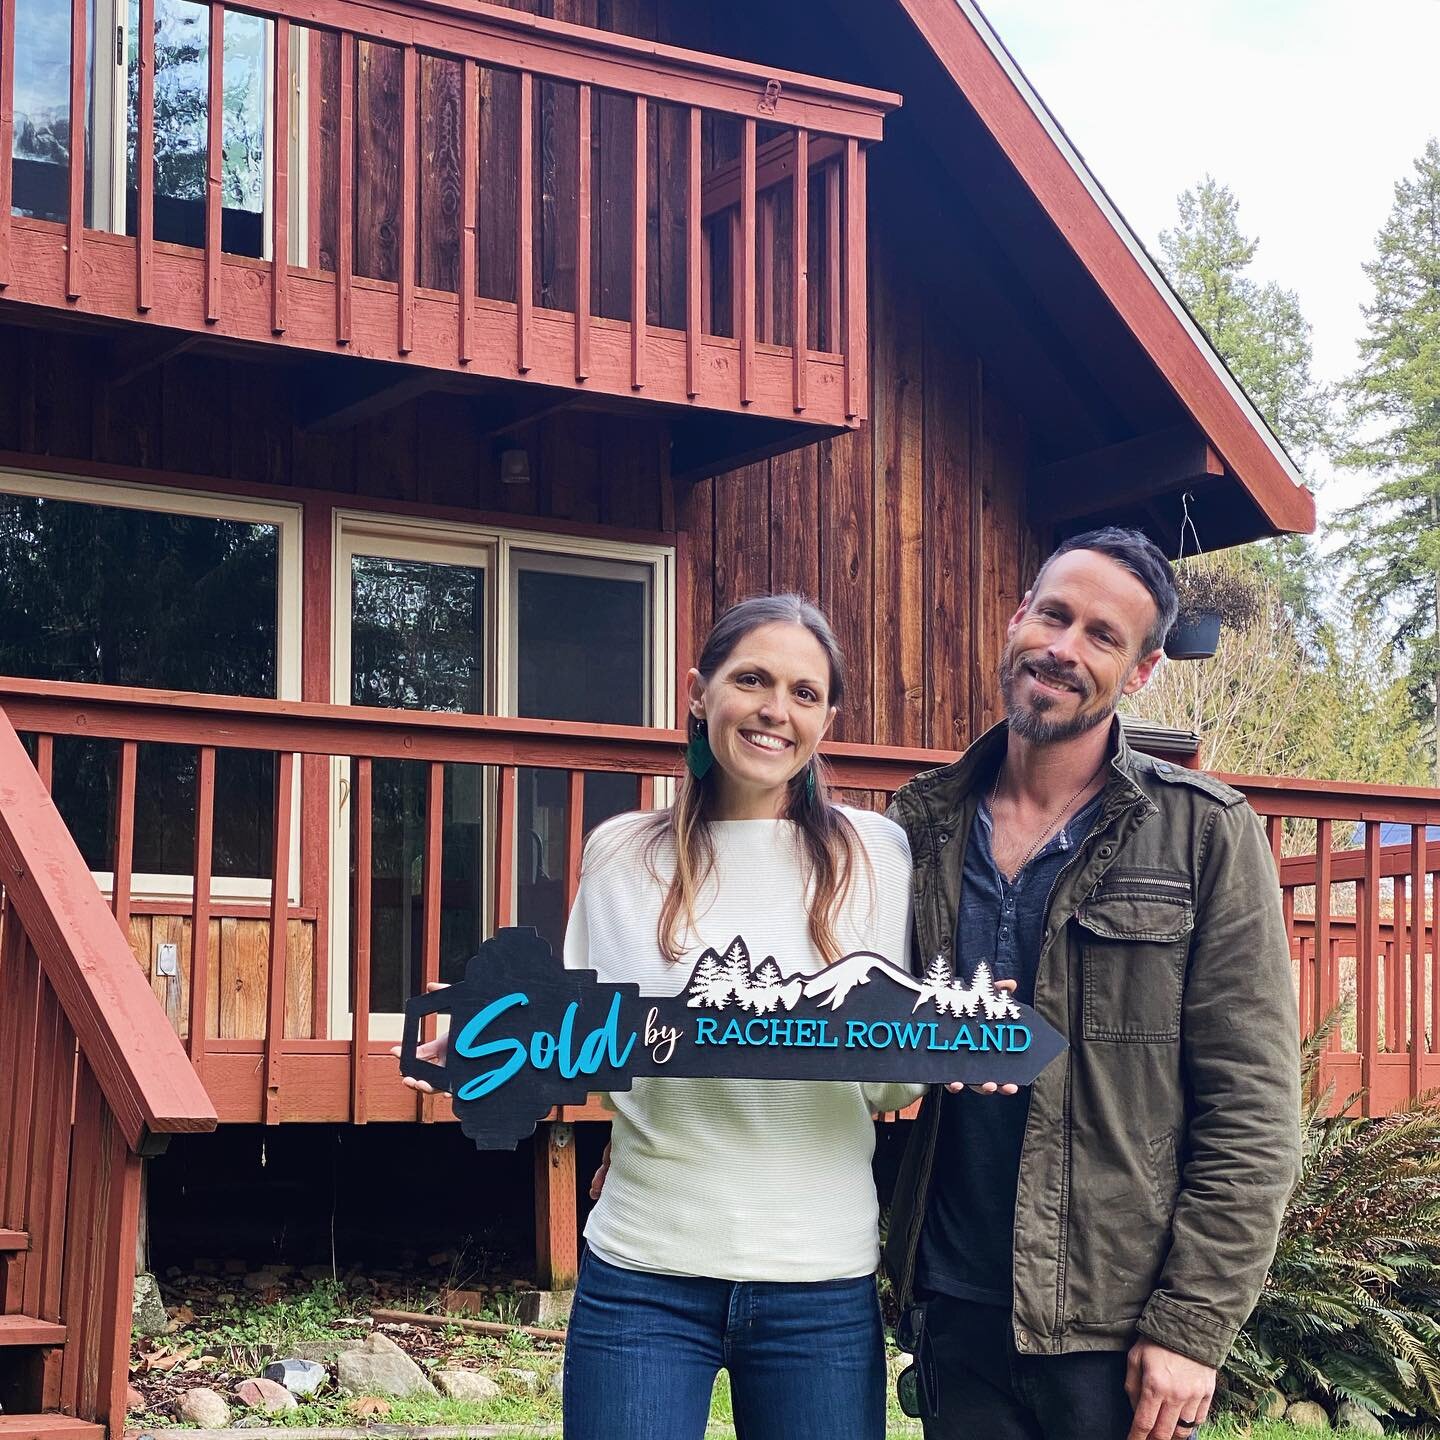 WE BOUGHT A HOUSE!! ✨🏠💗
.
@mysenor1 and I are so excited to announce we bought a home in Graham, WA!! Over 2.5 acres are all ours! This will be our biggest adventure yet no doubt!
.
Thank you to @rachelrowlandrealestate for helping us find our fore